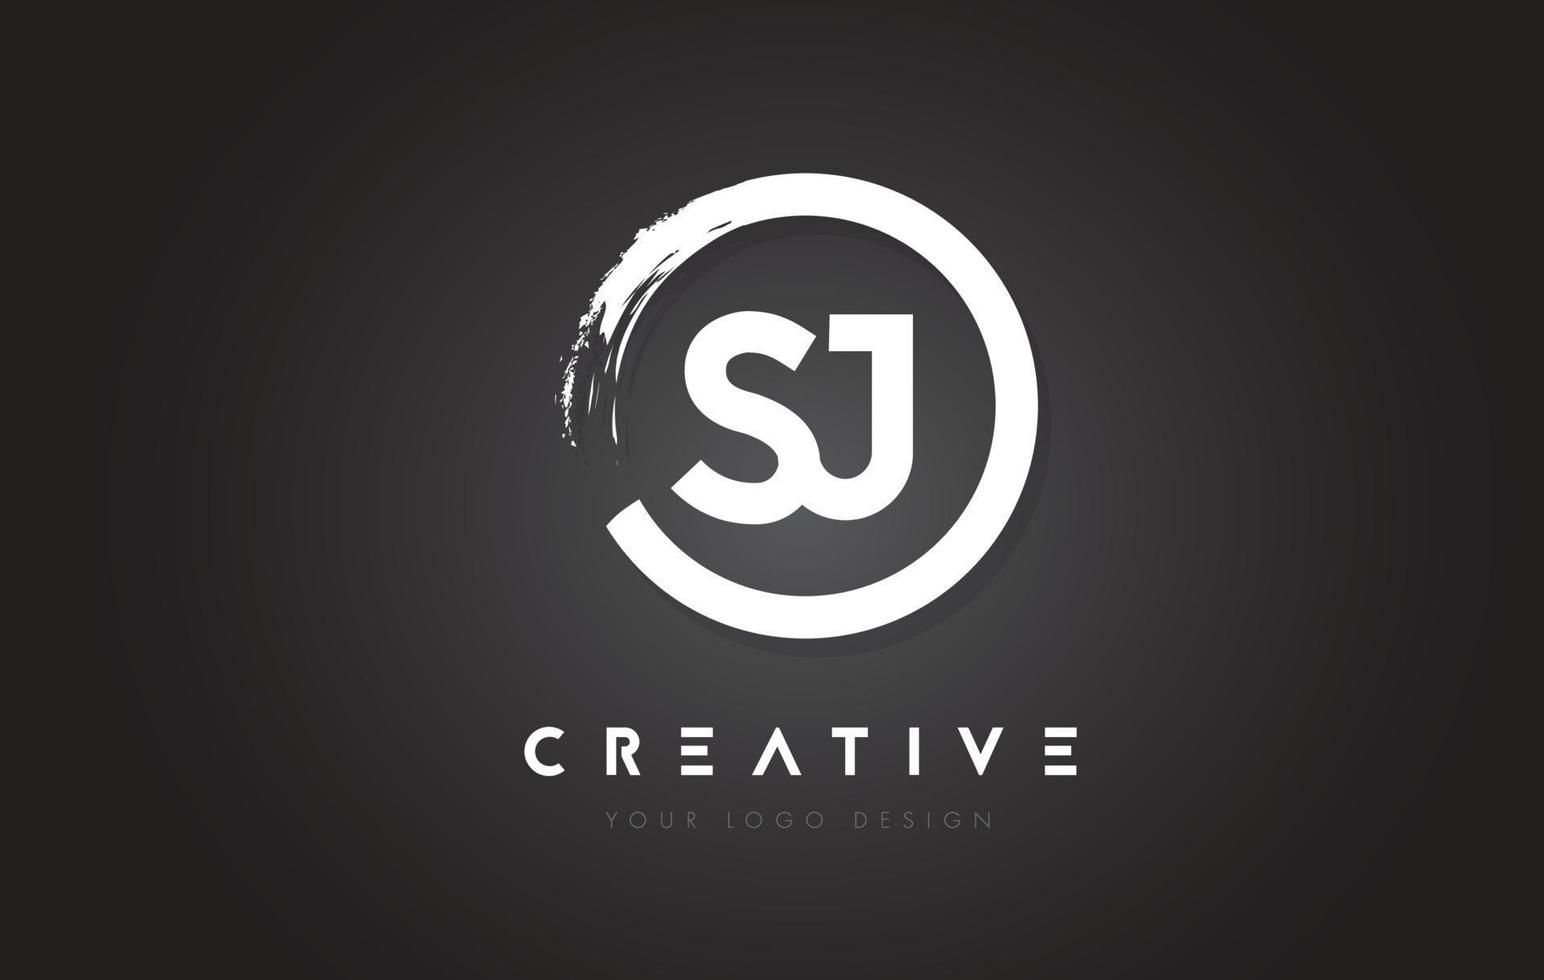 SJ Circular Letter Logo with Circle Brush Design and Black Background. vector